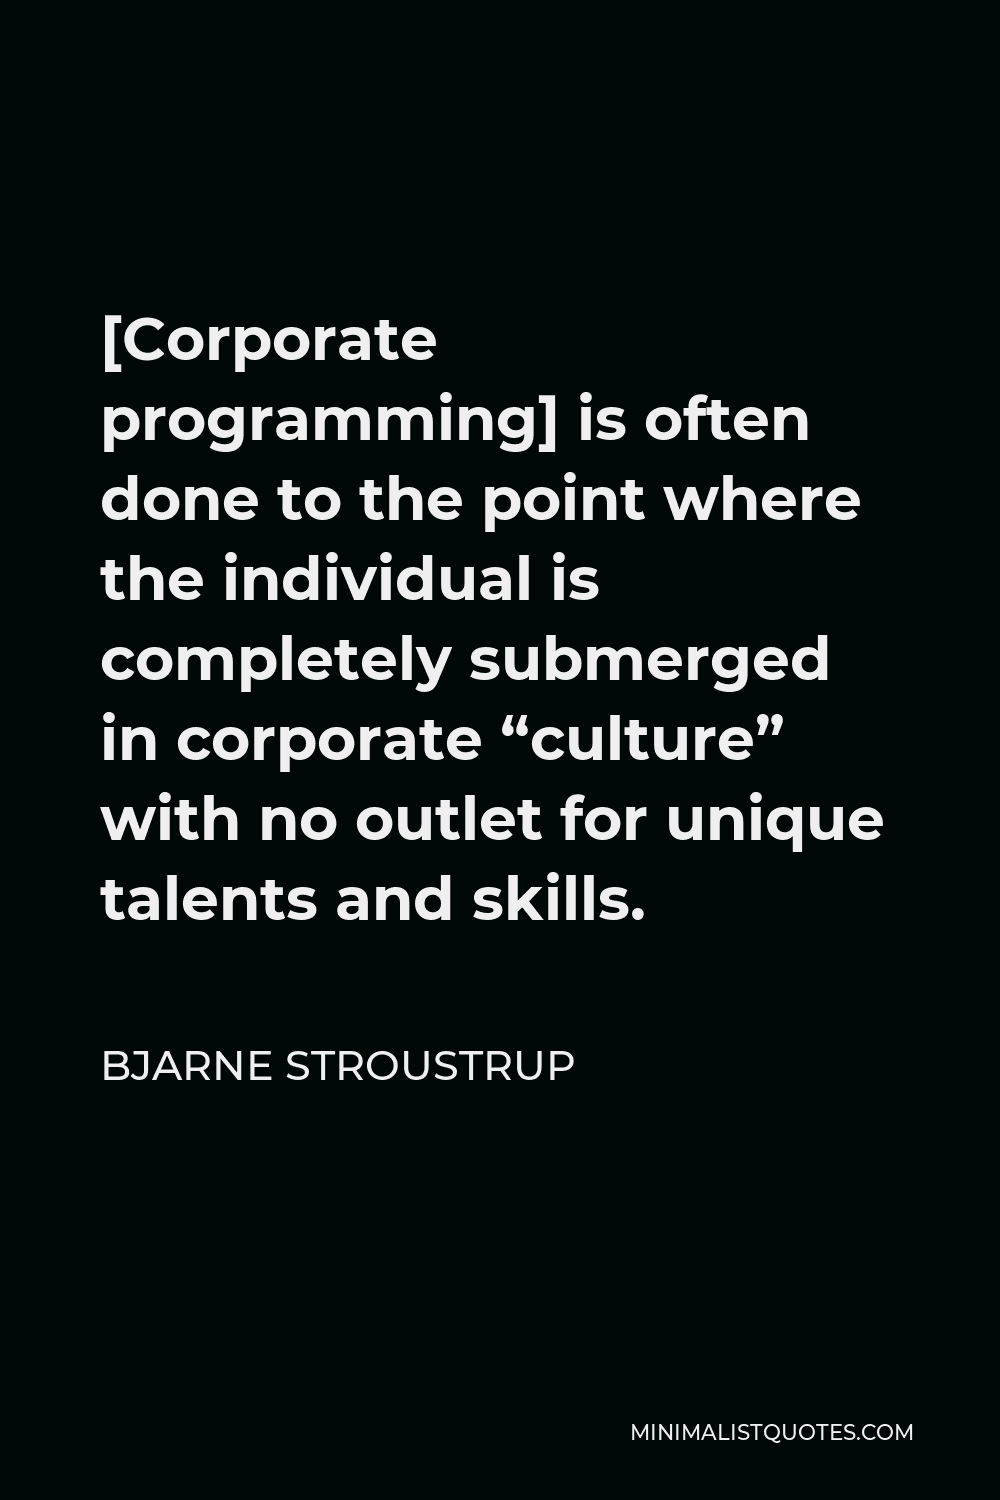 Bjarne Stroustrup Quote - [Corporate programming] is often done to the point where the individual is completely submerged in corporate “culture” with no outlet for unique talents and skills.